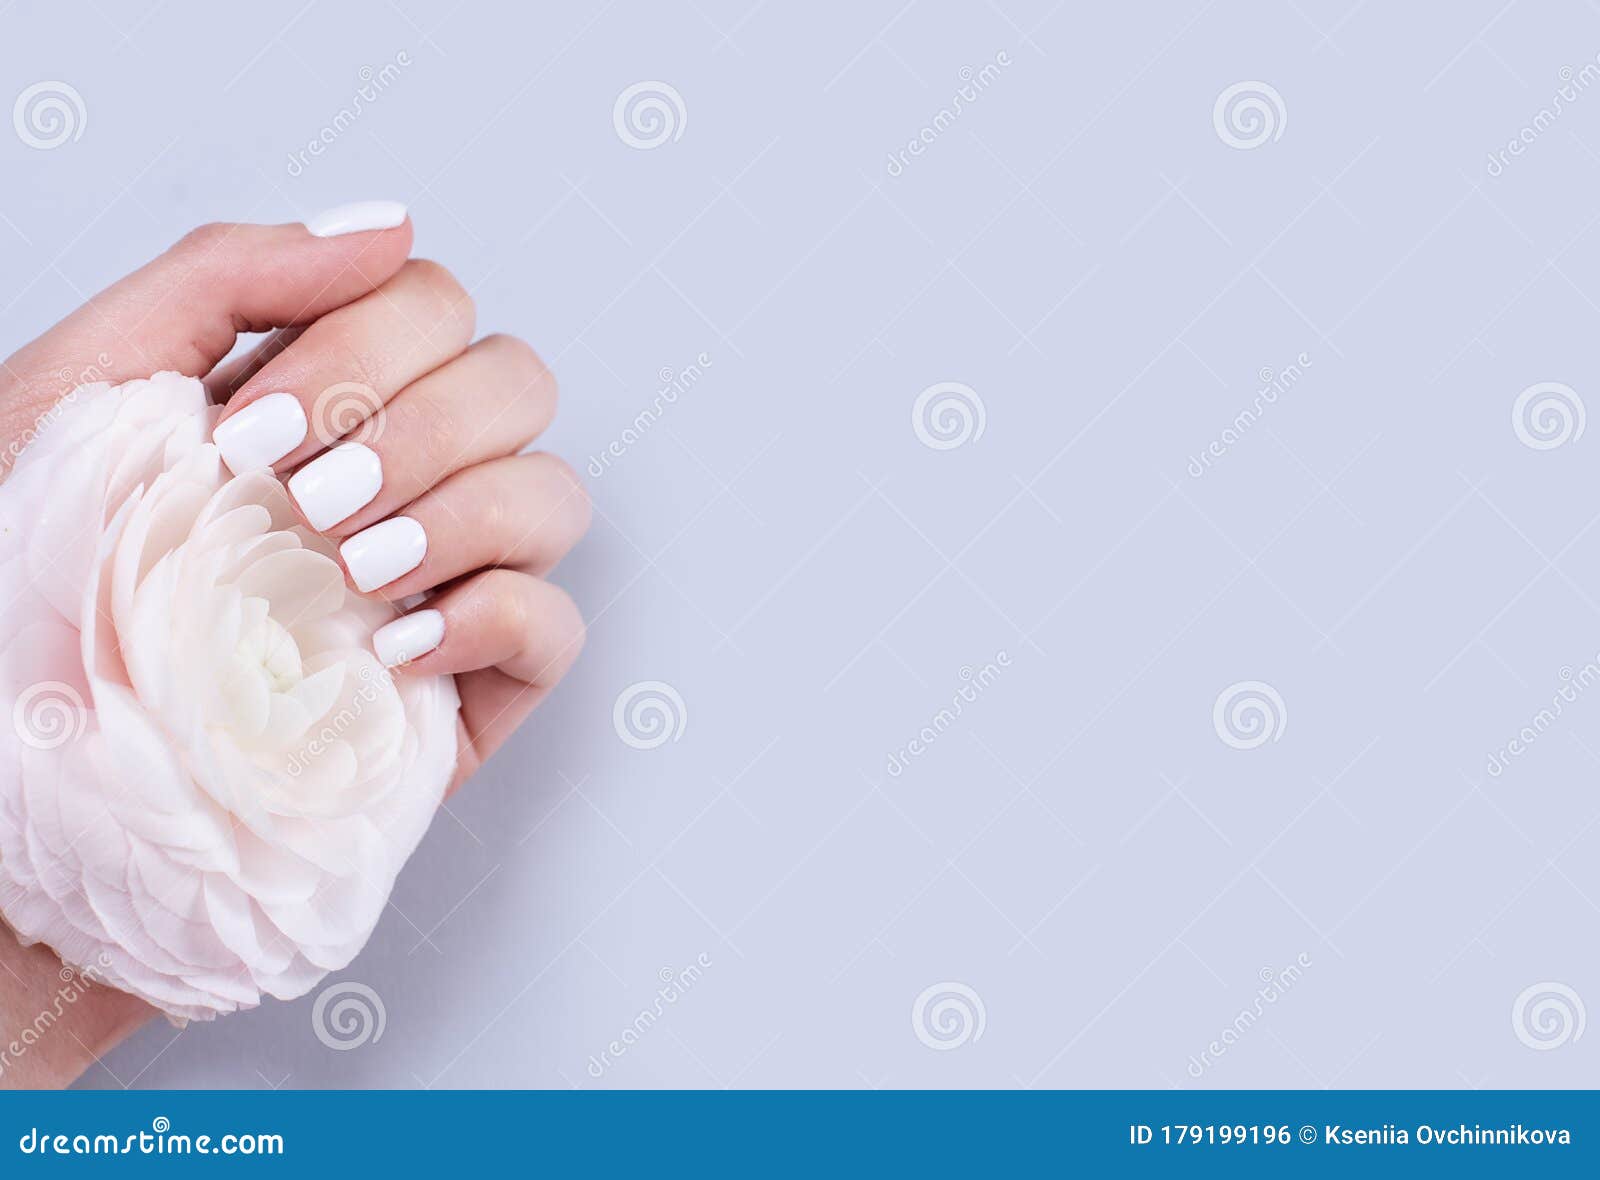 Woman Hands with Manicure and Wedding Ring among White Lace and Little ...